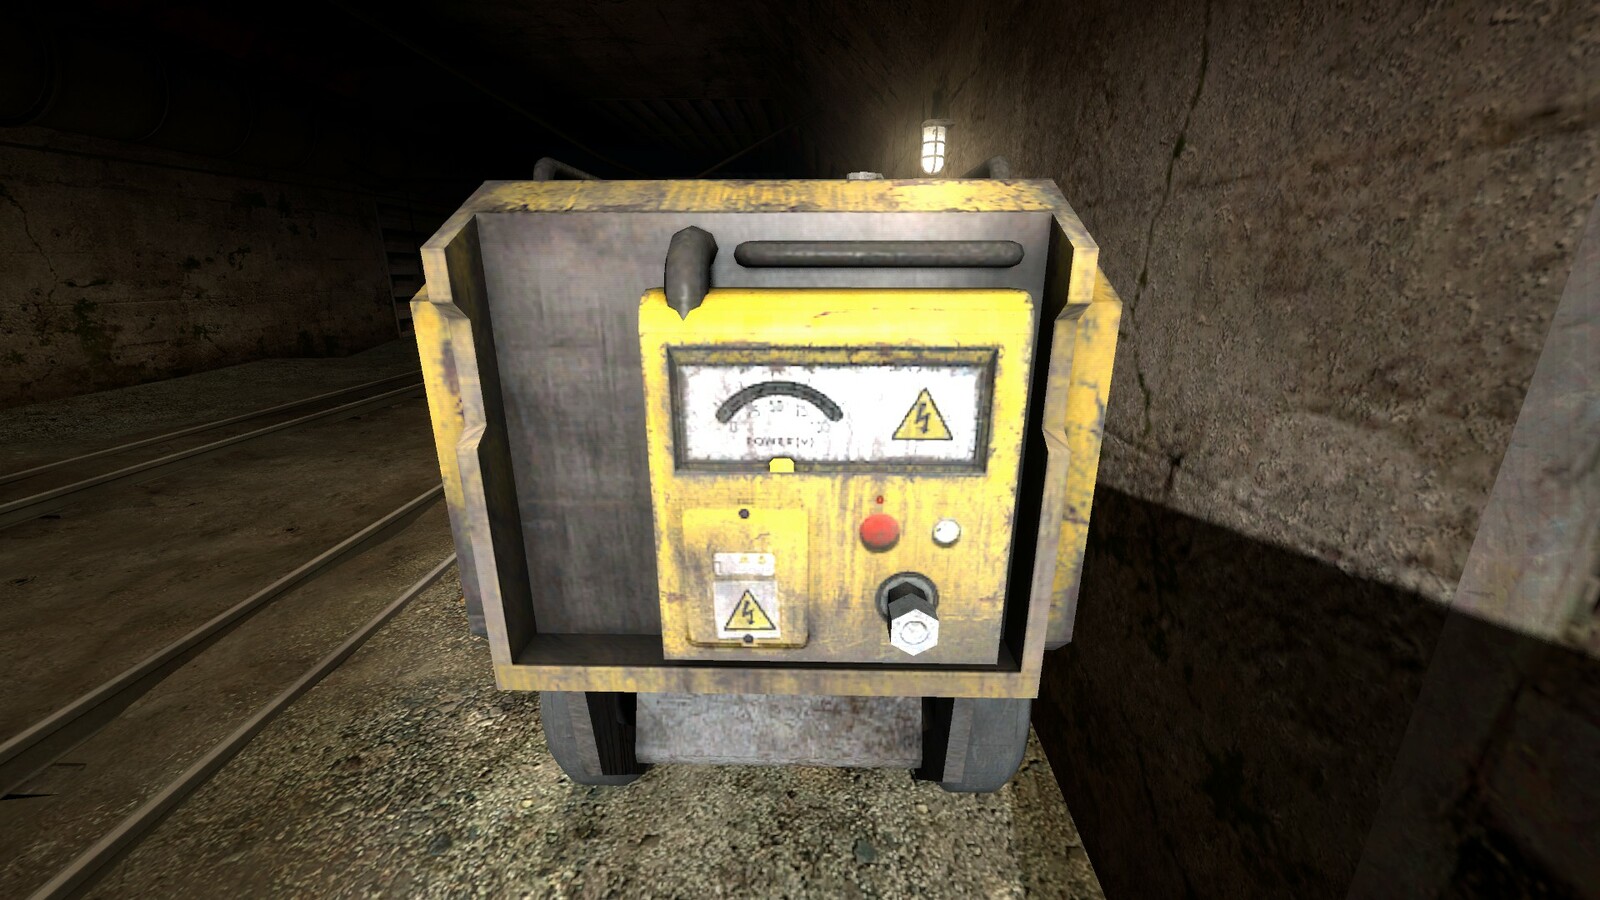 Generator from Half-Life 2 Episode 2 which inspired me